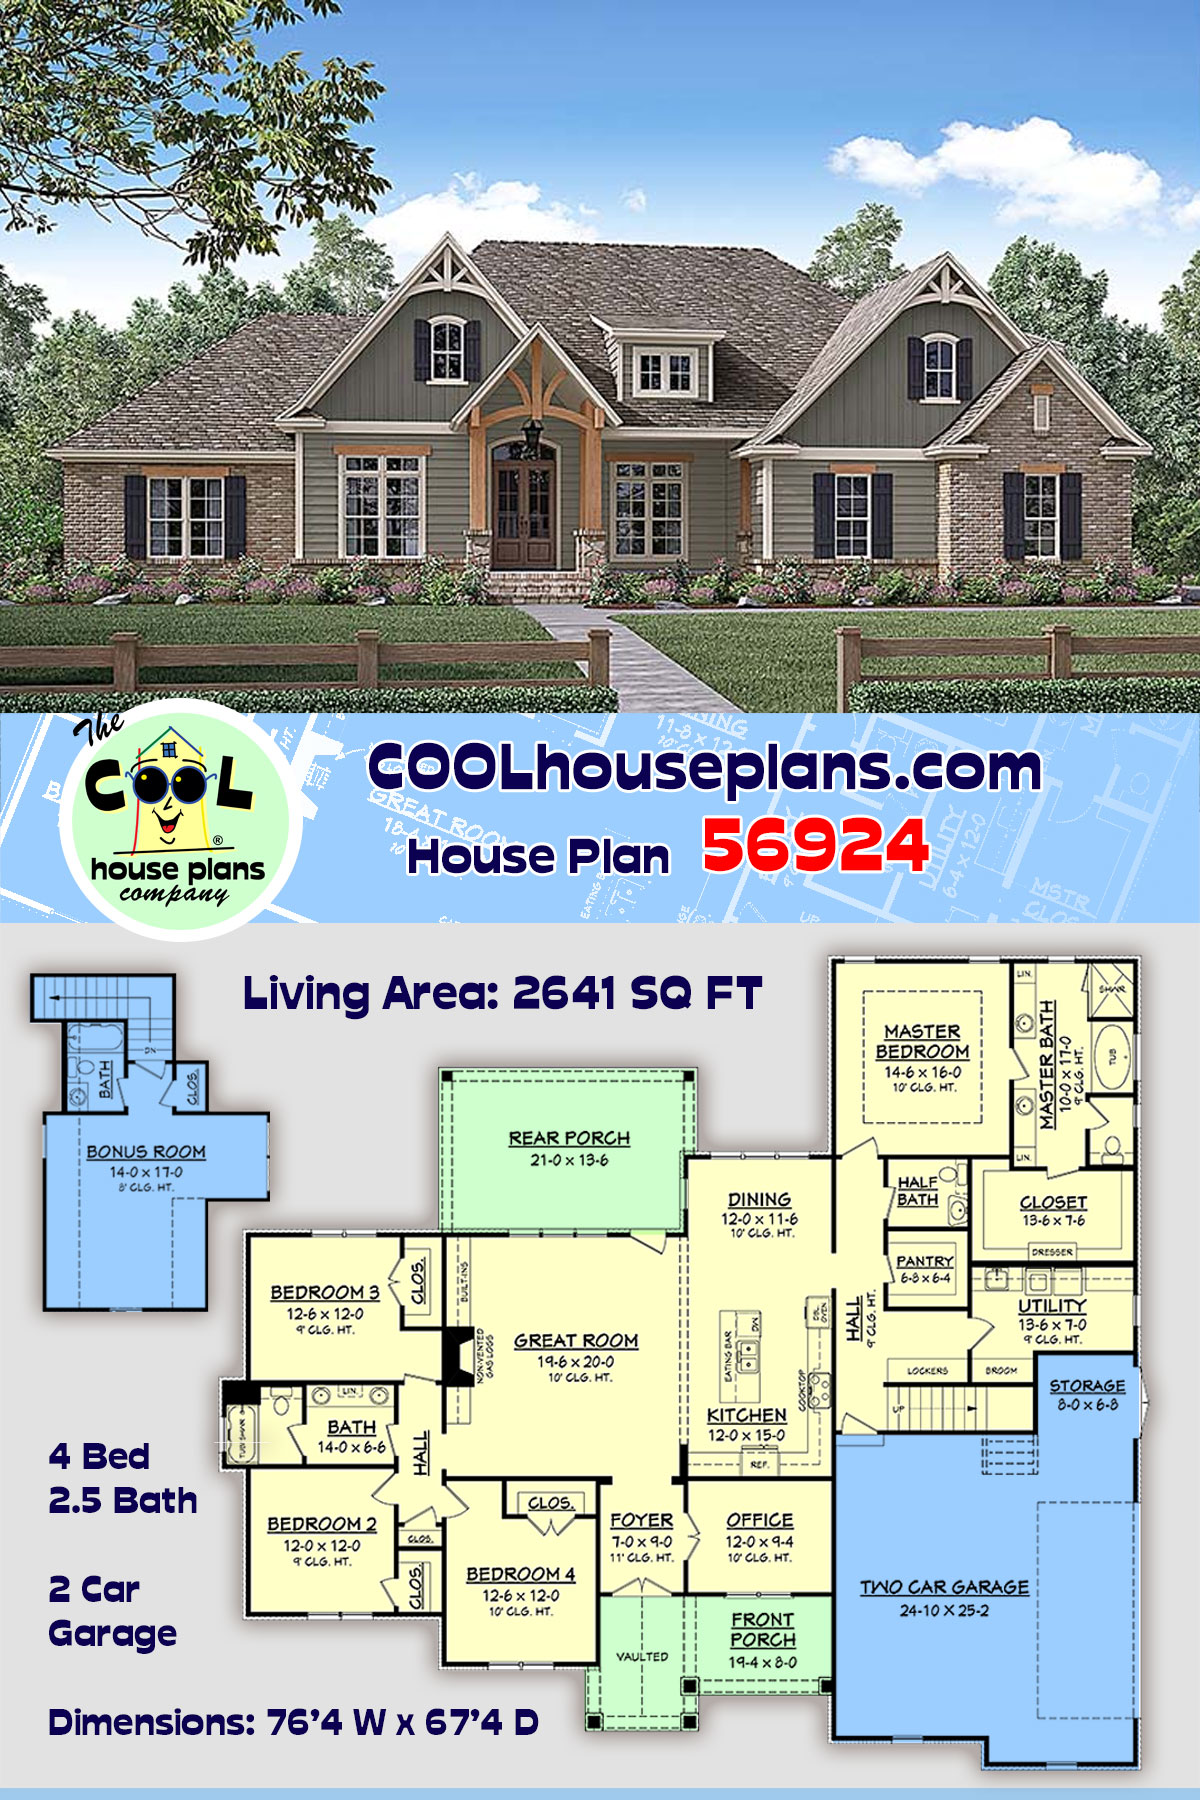 Country, Craftsman, Traditional House Plan 56924 with 4 Beds, 3 Baths, 2 Car Garage